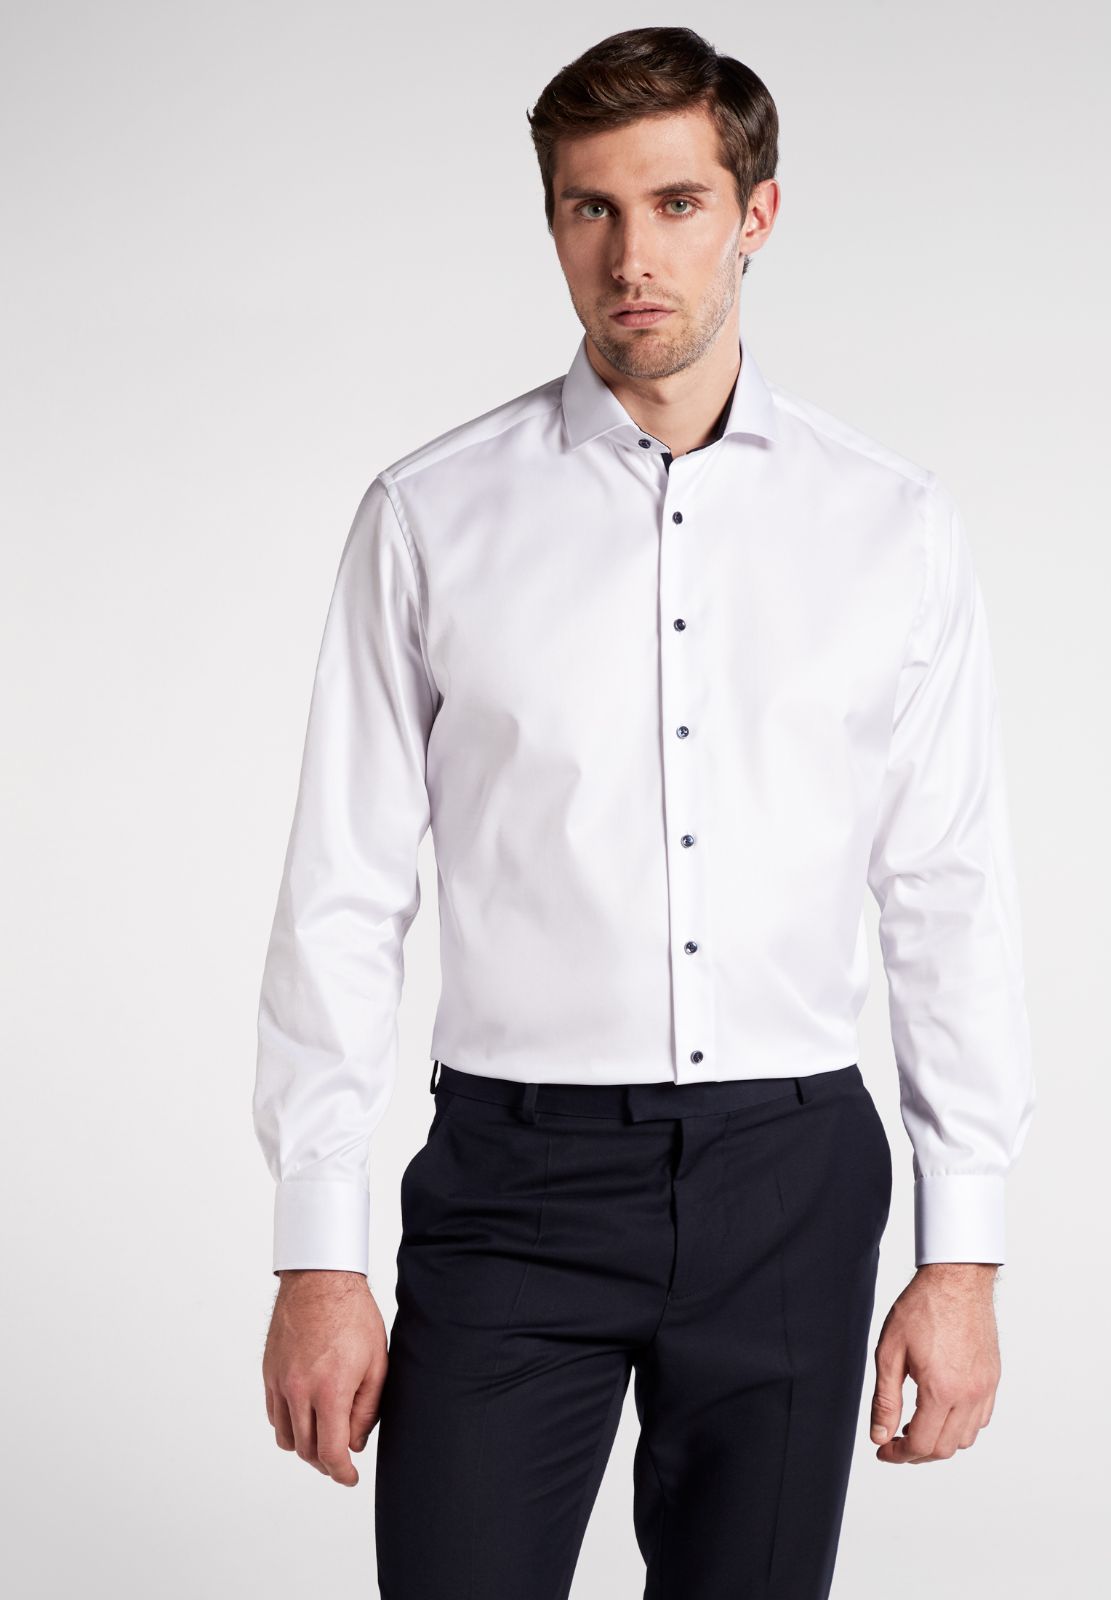 Modern Fit cover shirt with contrast button